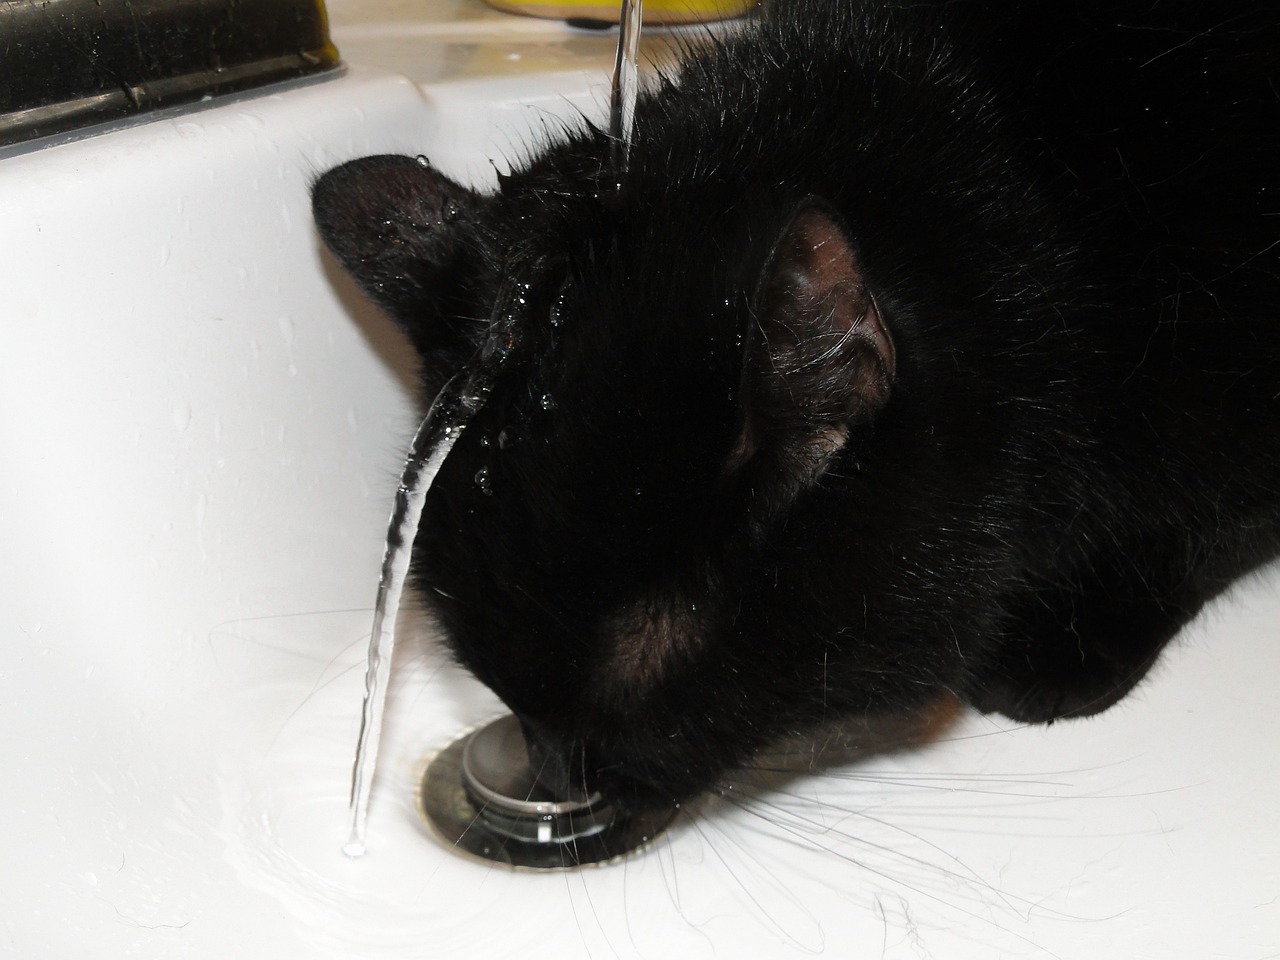 Black cat with head under running faucet, but drinking from the drain.